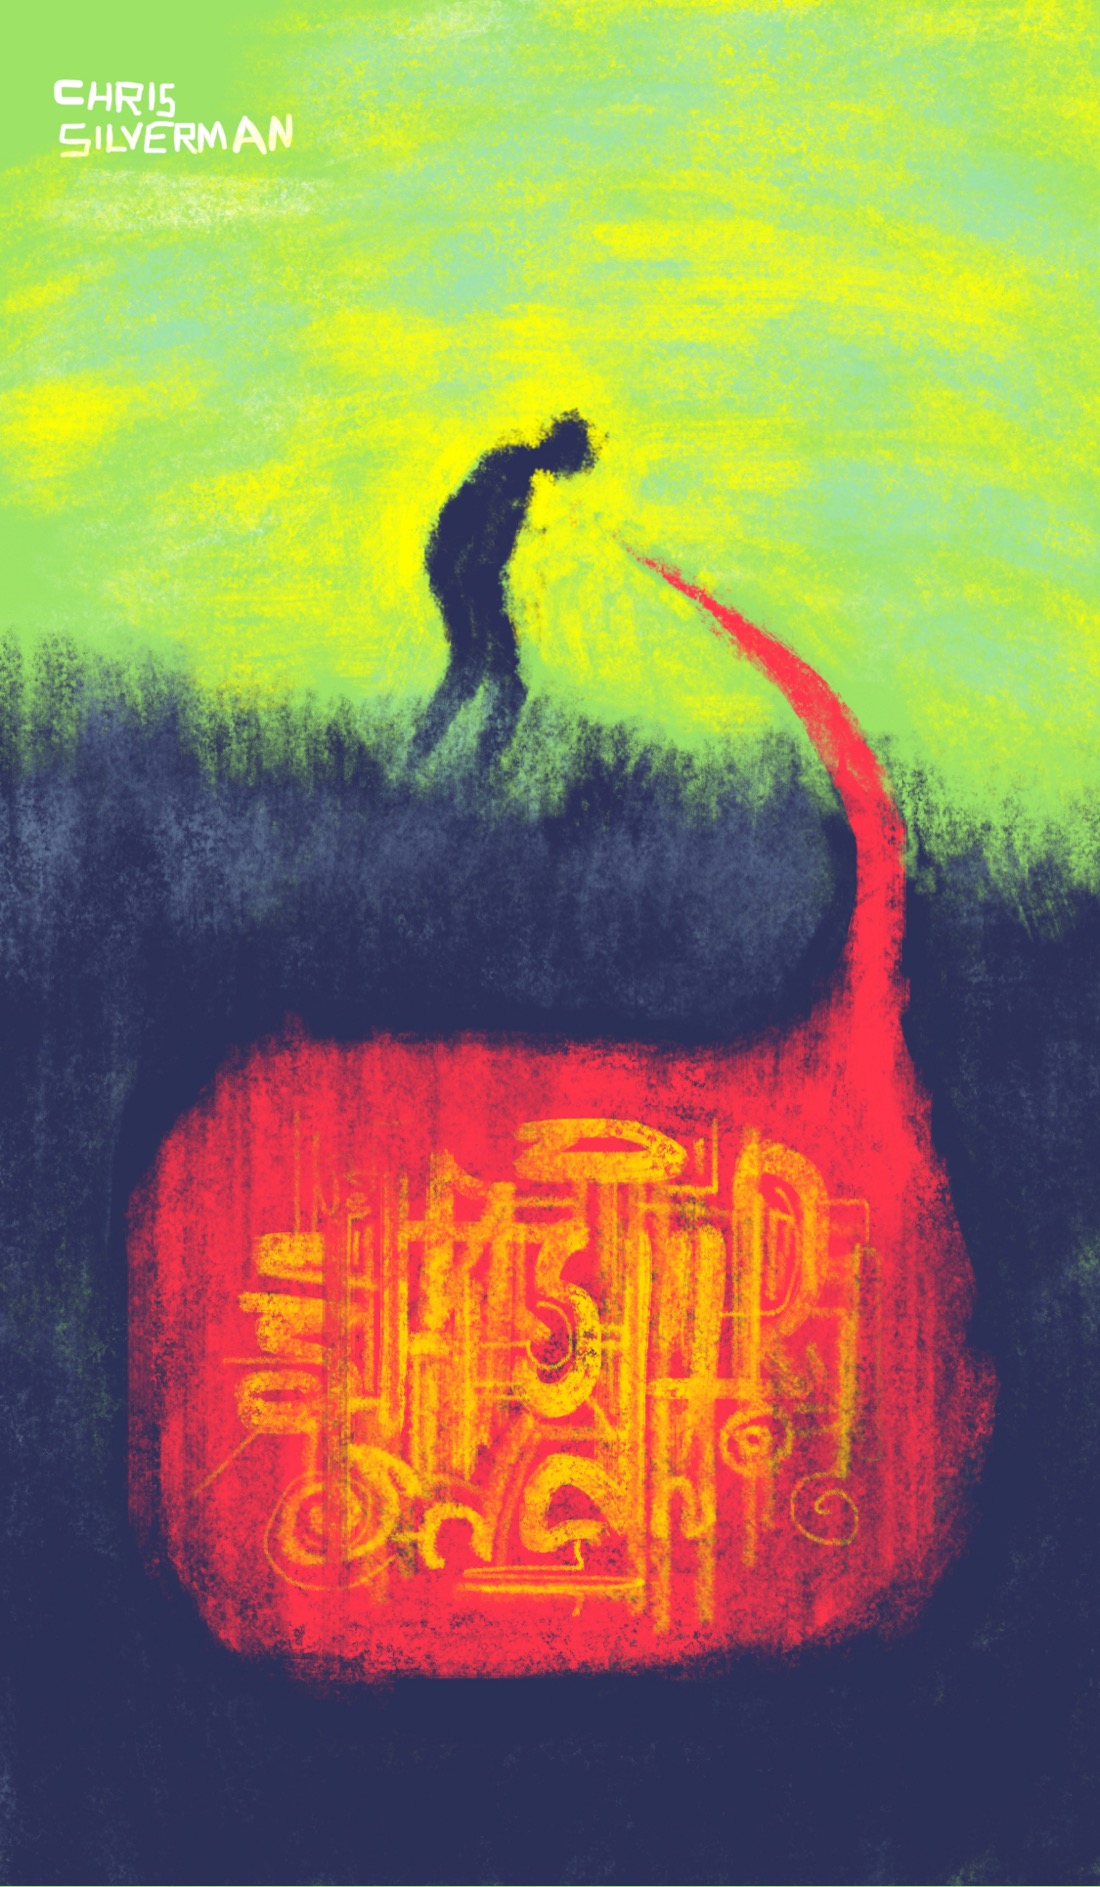 A person stands on a grassy hillside, silhouetted in the dull afternoon light. Buried in the ground below the person is a huge red speech balloon with some strange alien writing in it. The tail of the balloon points to the figure's mouth, snaking out of the ground like a red sprout from a giant red seed. It looks as though the person is consigning a vast, weird secret into the earth. The sky is yellowish green; the hillside, drawn like a cutaway, is gray-black; the intricate writing inside the balloon is yellow.